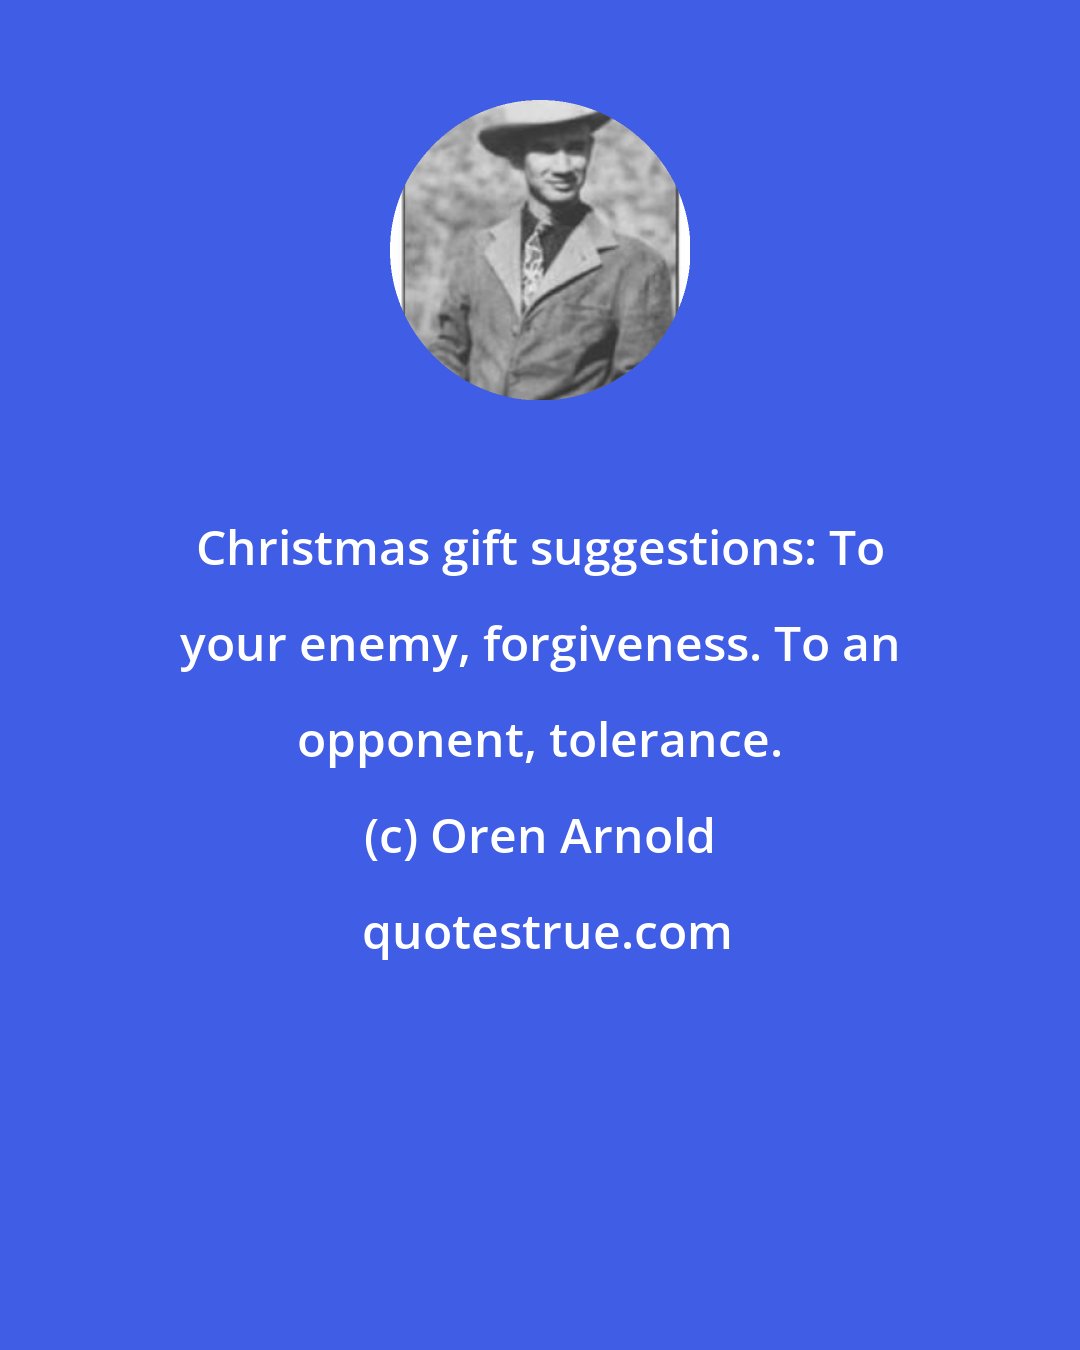 Oren Arnold: Christmas gift suggestions: To your enemy, forgiveness. To an opponent, tolerance.